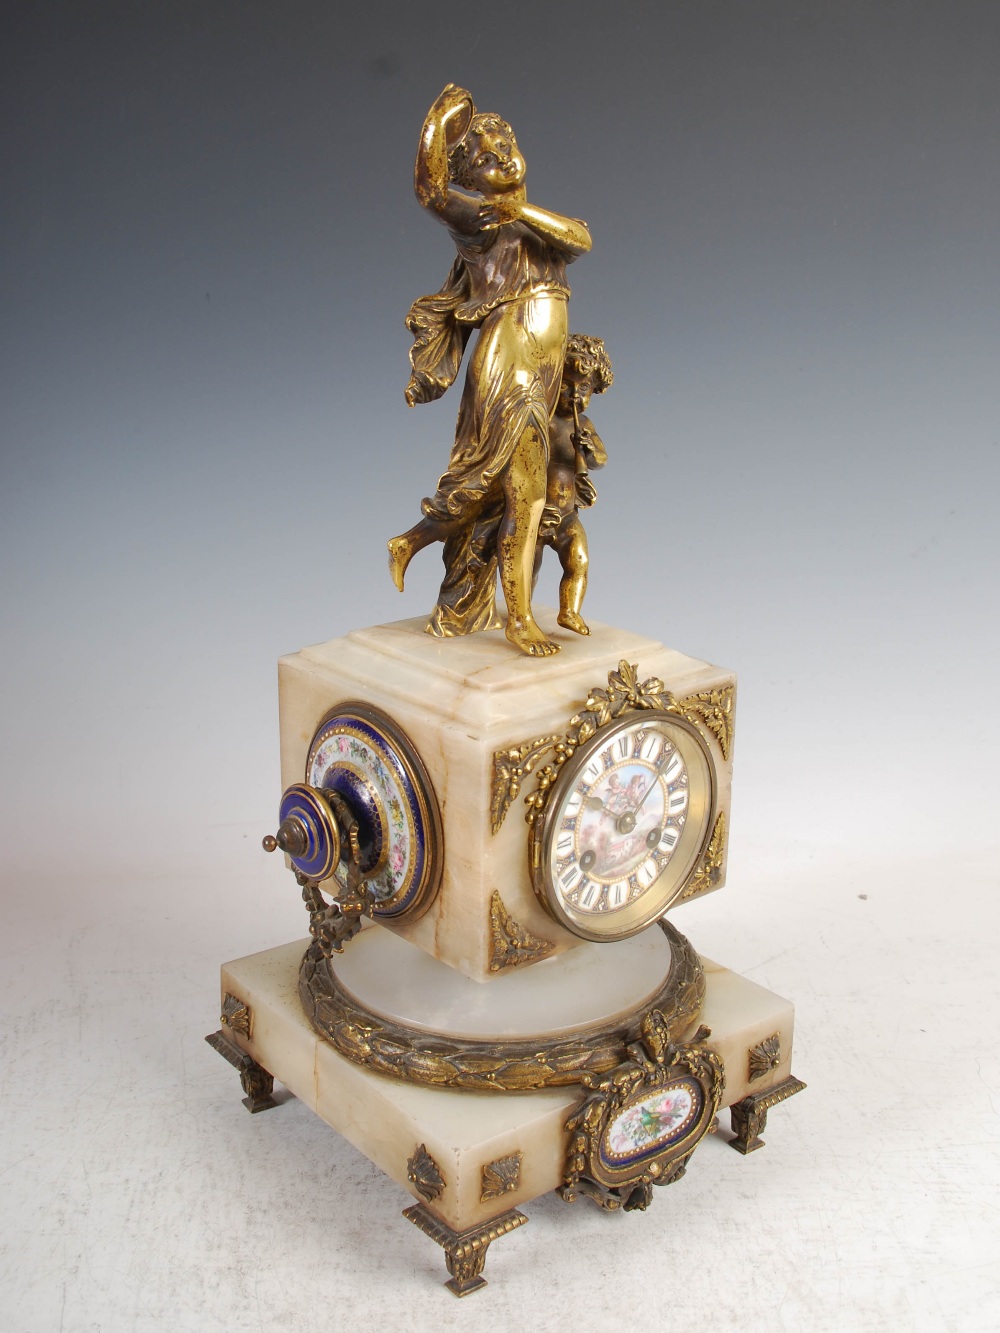 A late 19th century French onyx ormolu and porcelain mounted mantel clock, the blue ground porcelain